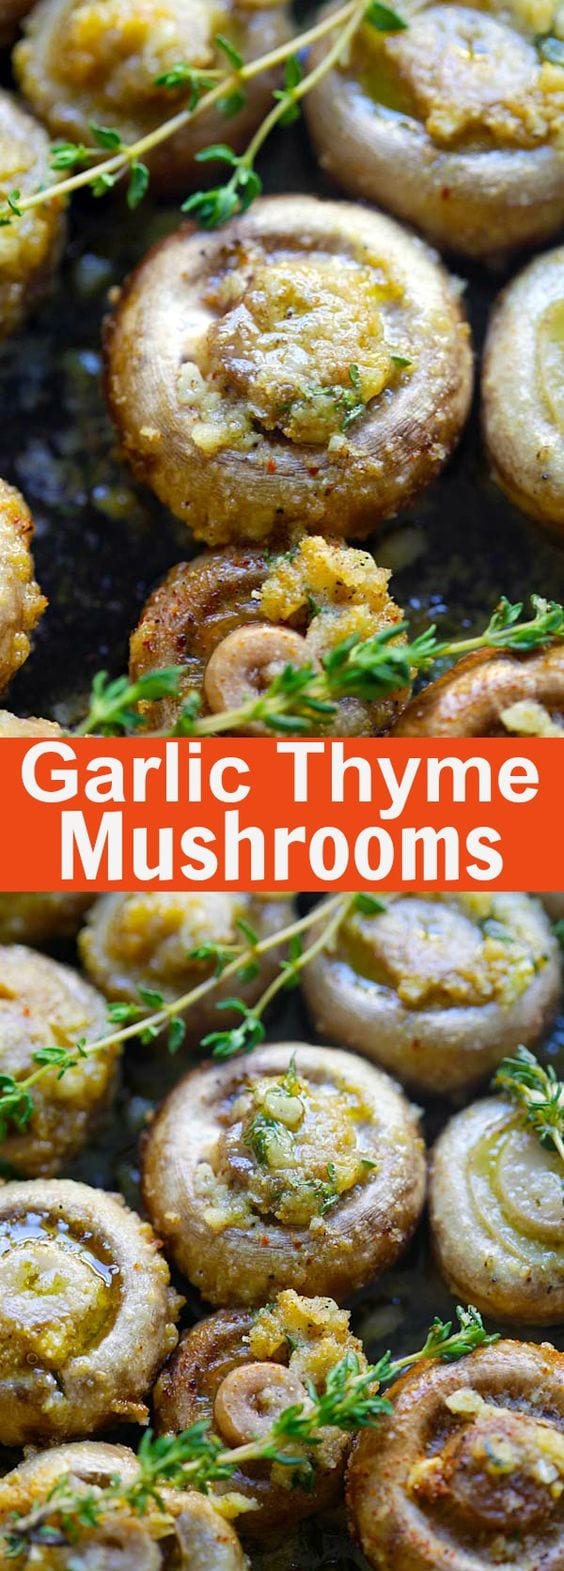 Buttery roasted mushrooms with garlic, thyme and breadcrumbs. A healthy and easy side dish | rasamalaysia.com